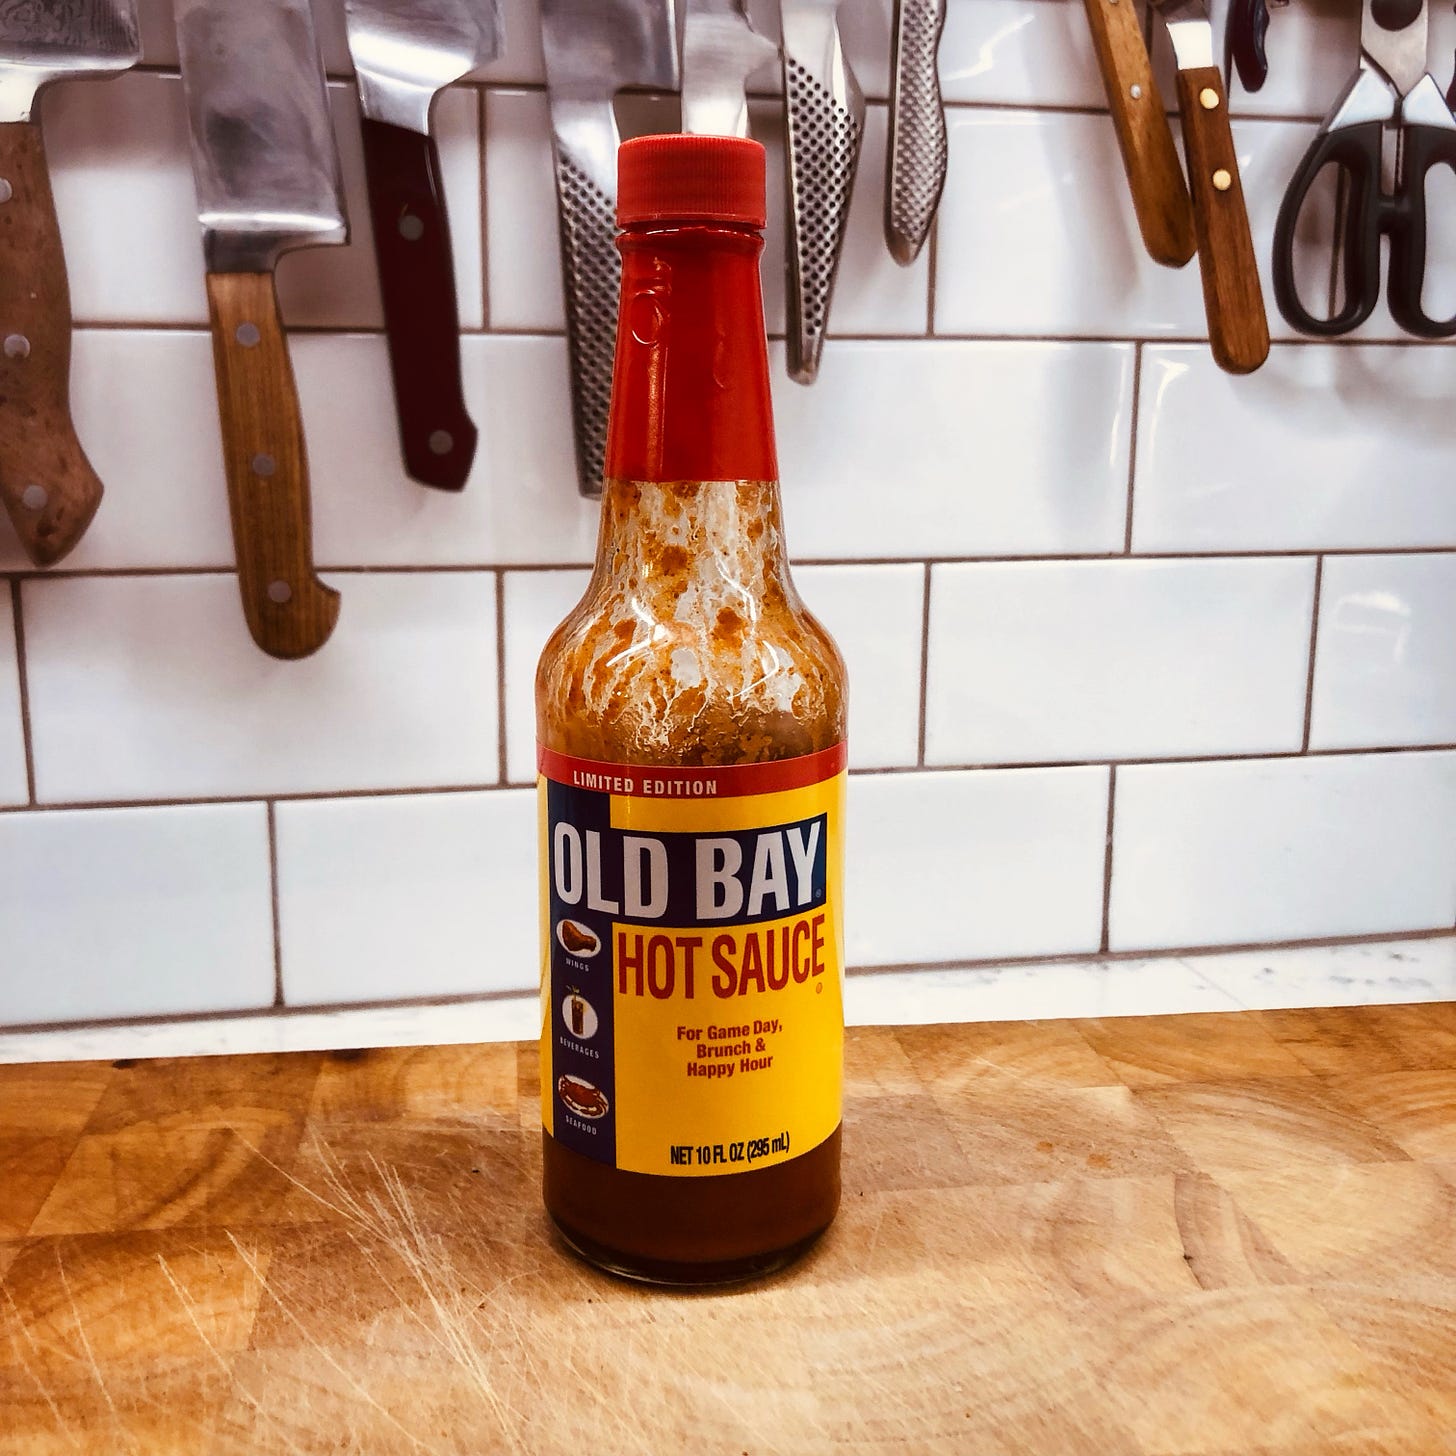 A half-empty bottle of Old Bay hot sauce on a cutting board in a kitchen